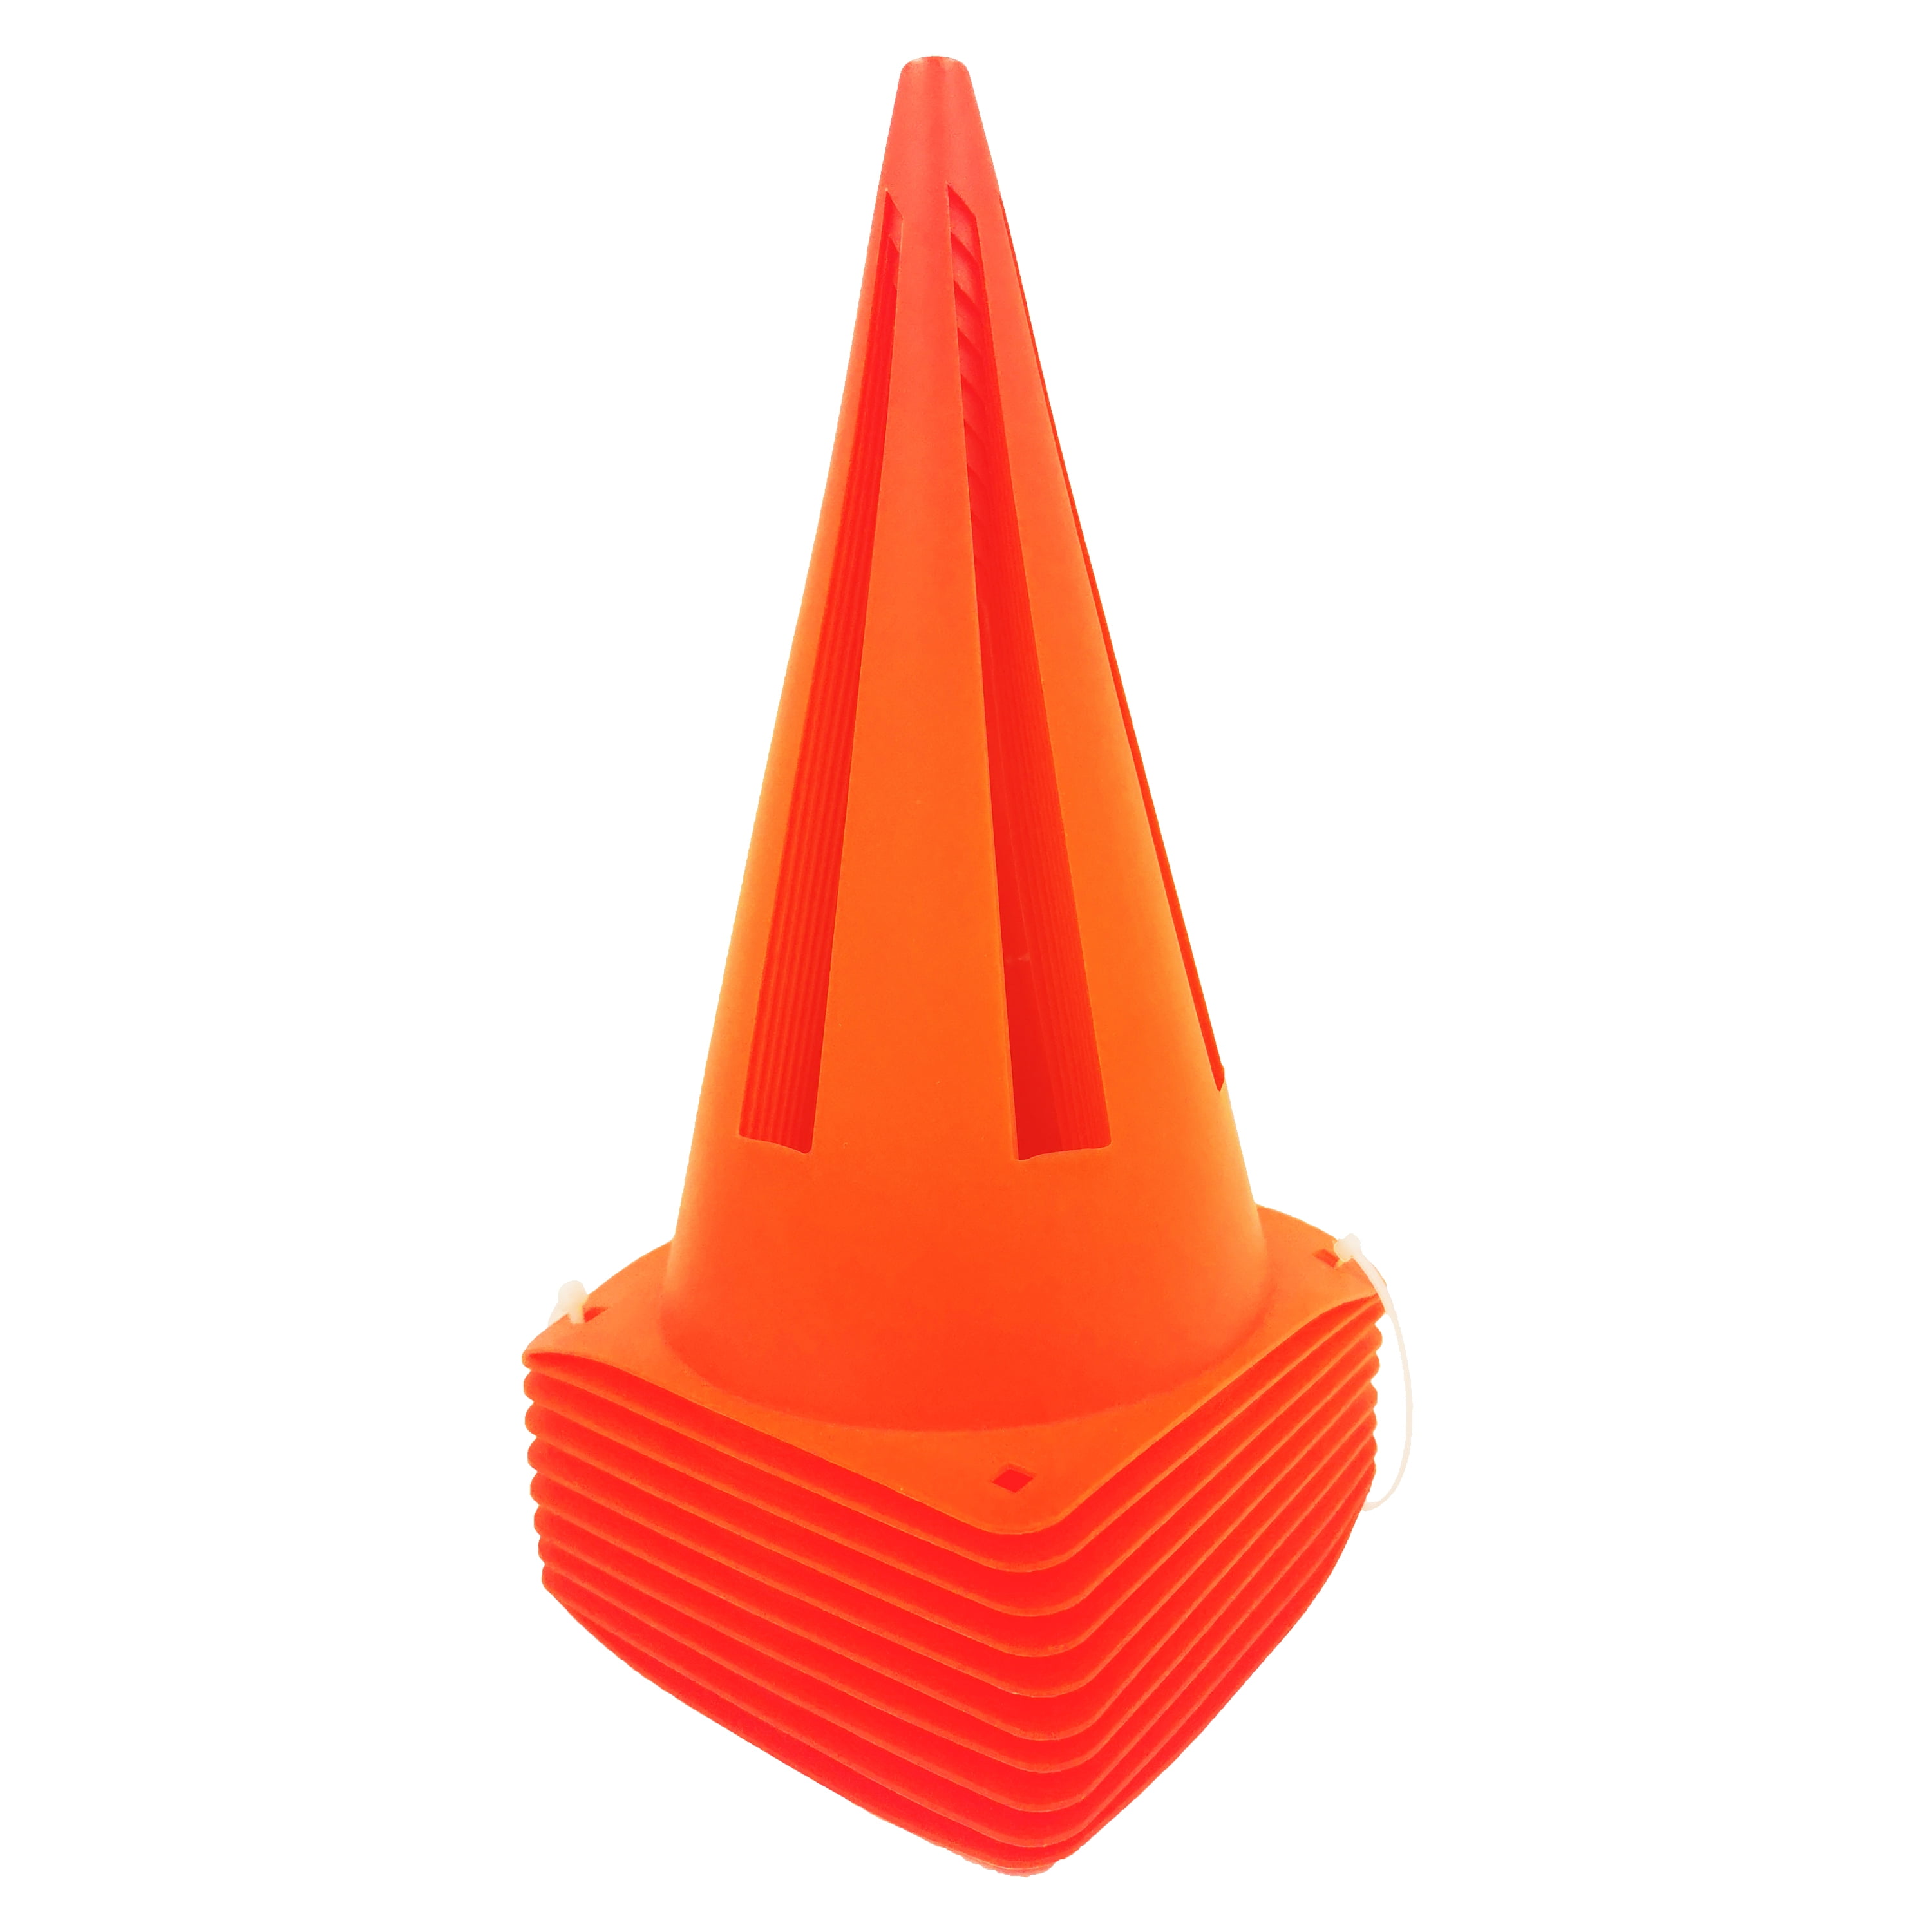 Slalom cone stud football ground multicolor roller obstacle training sport 